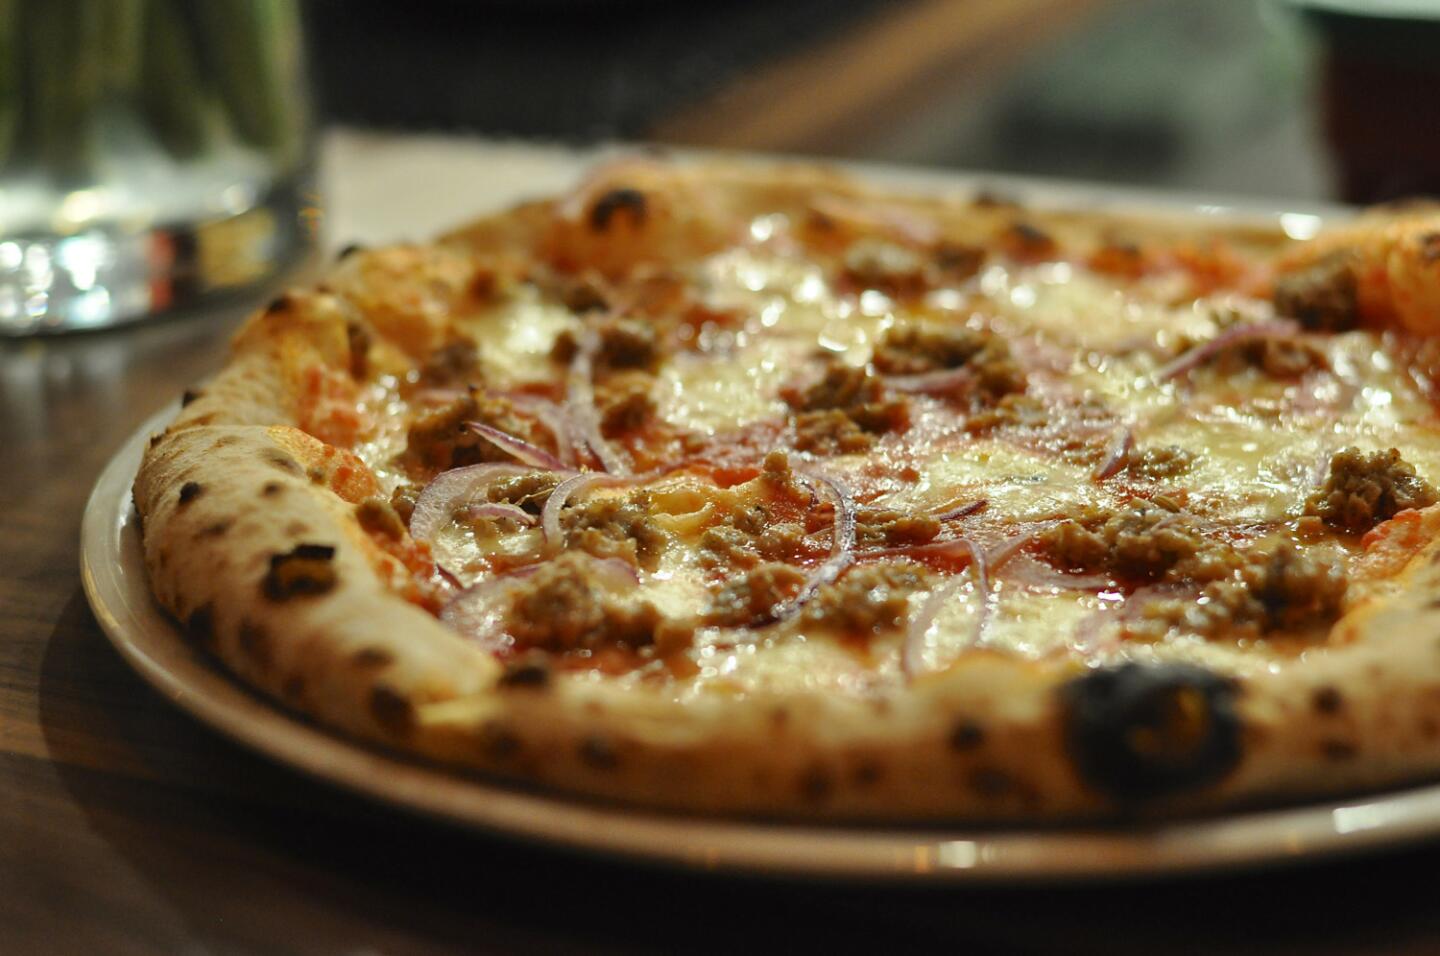 Fennel-pork sausage pizza with red onions and wild fennel pollen at All'Aqua in Atwater Village.